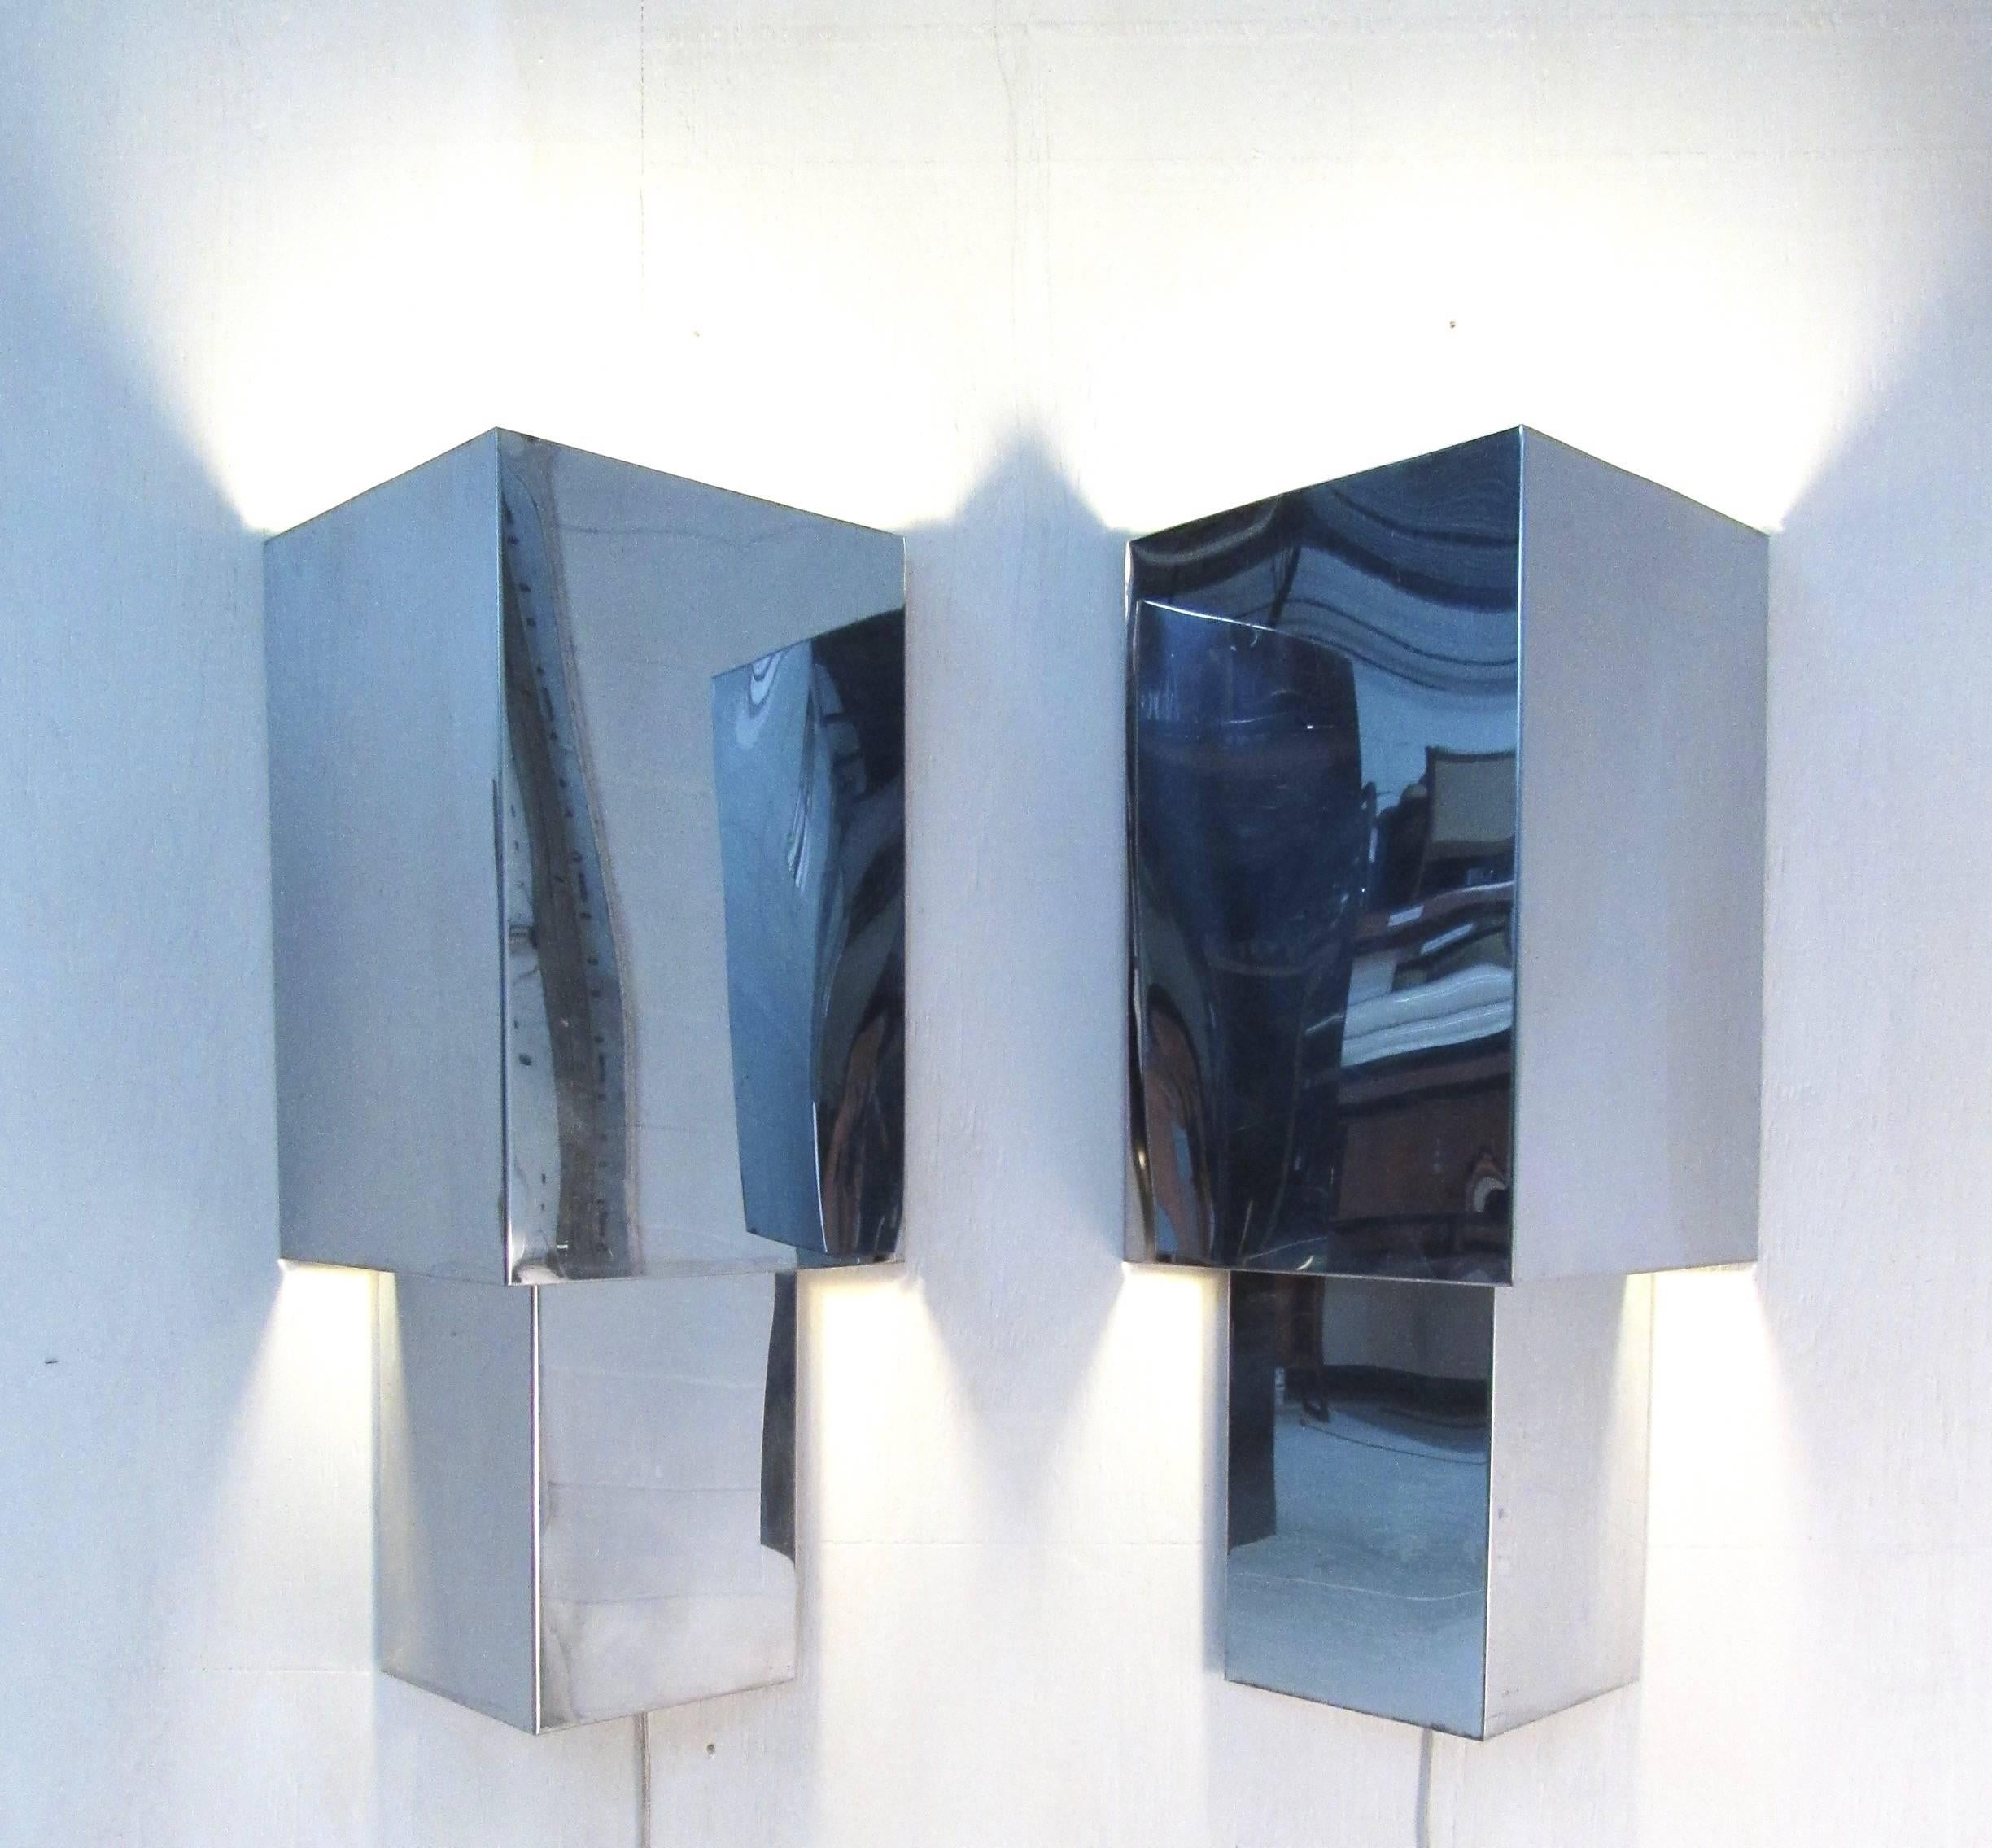 This matching pair of vintage chrome wall sconces features triangular metal construction, with unique wall-mounted design. Wonderful wall lighting for home, business, or office, the Mid-Century Modern style is perfect for a variety of settings.